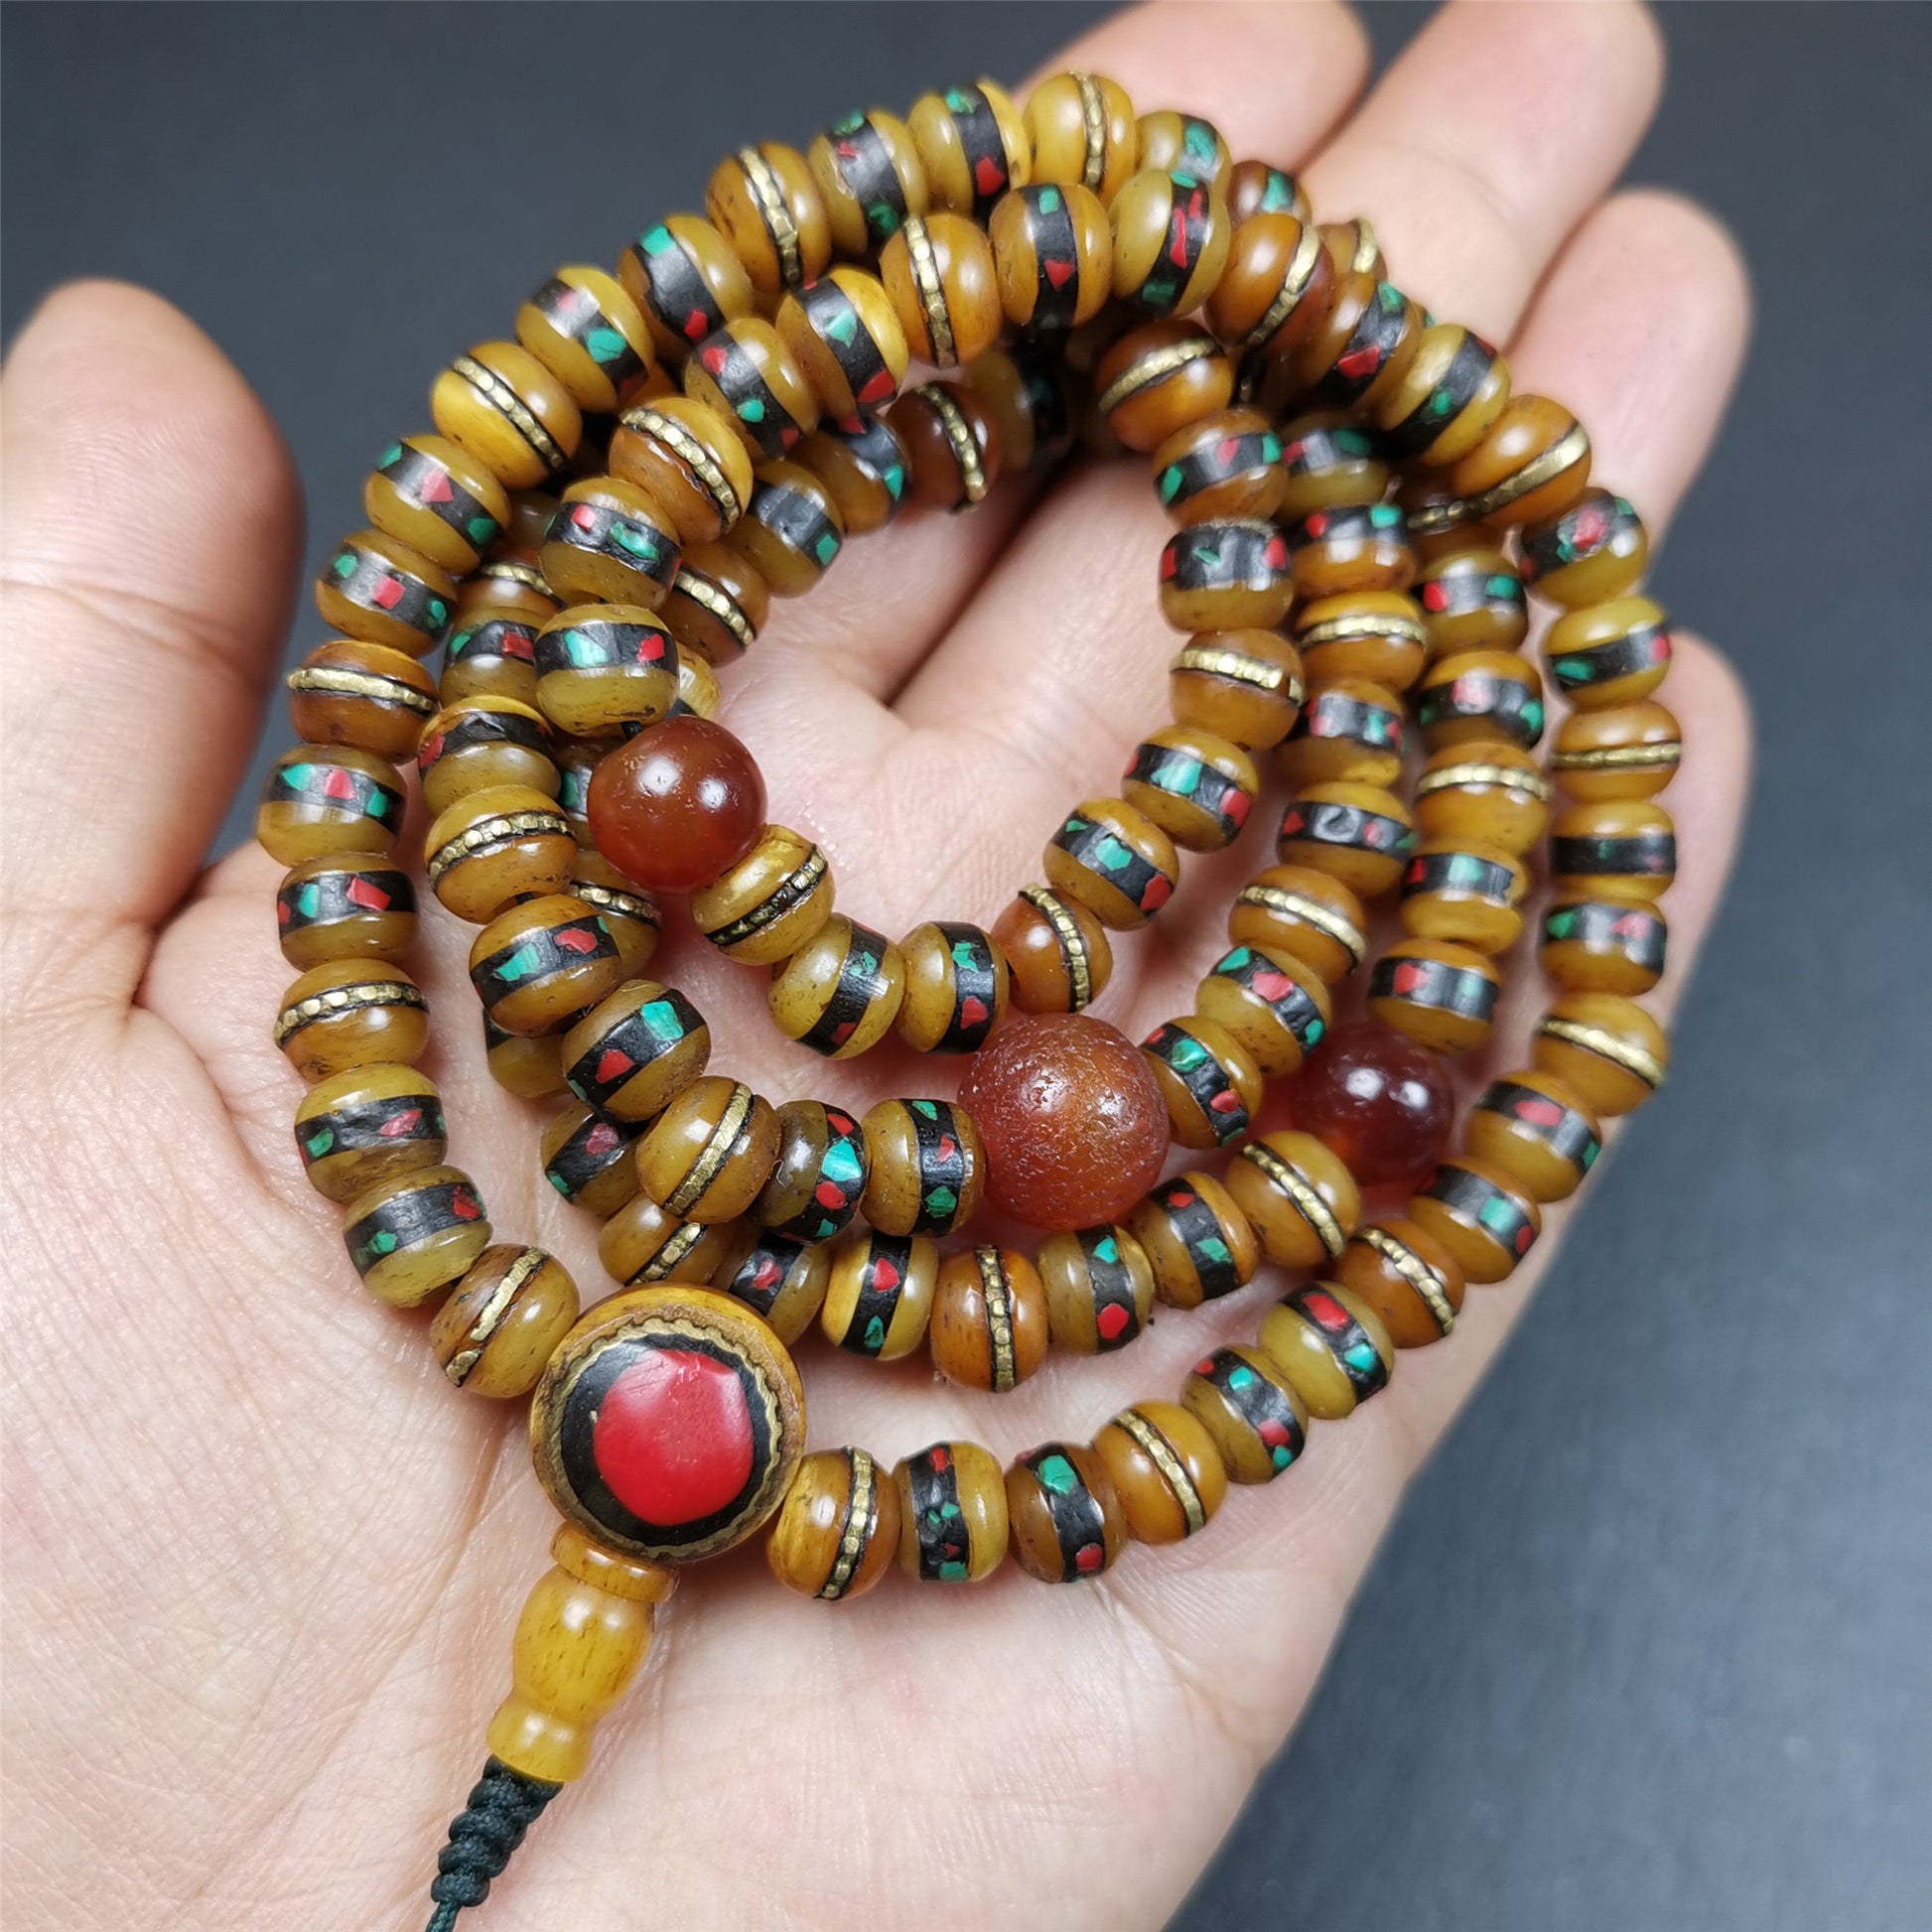 This mala bracelet was made by Tibetan craftsmen. It is made of yak bone,copper wire inlaid colorful color,108 beads diameter of 8mm / 0.32",circumference is 72cm / 28",with old agate beads.